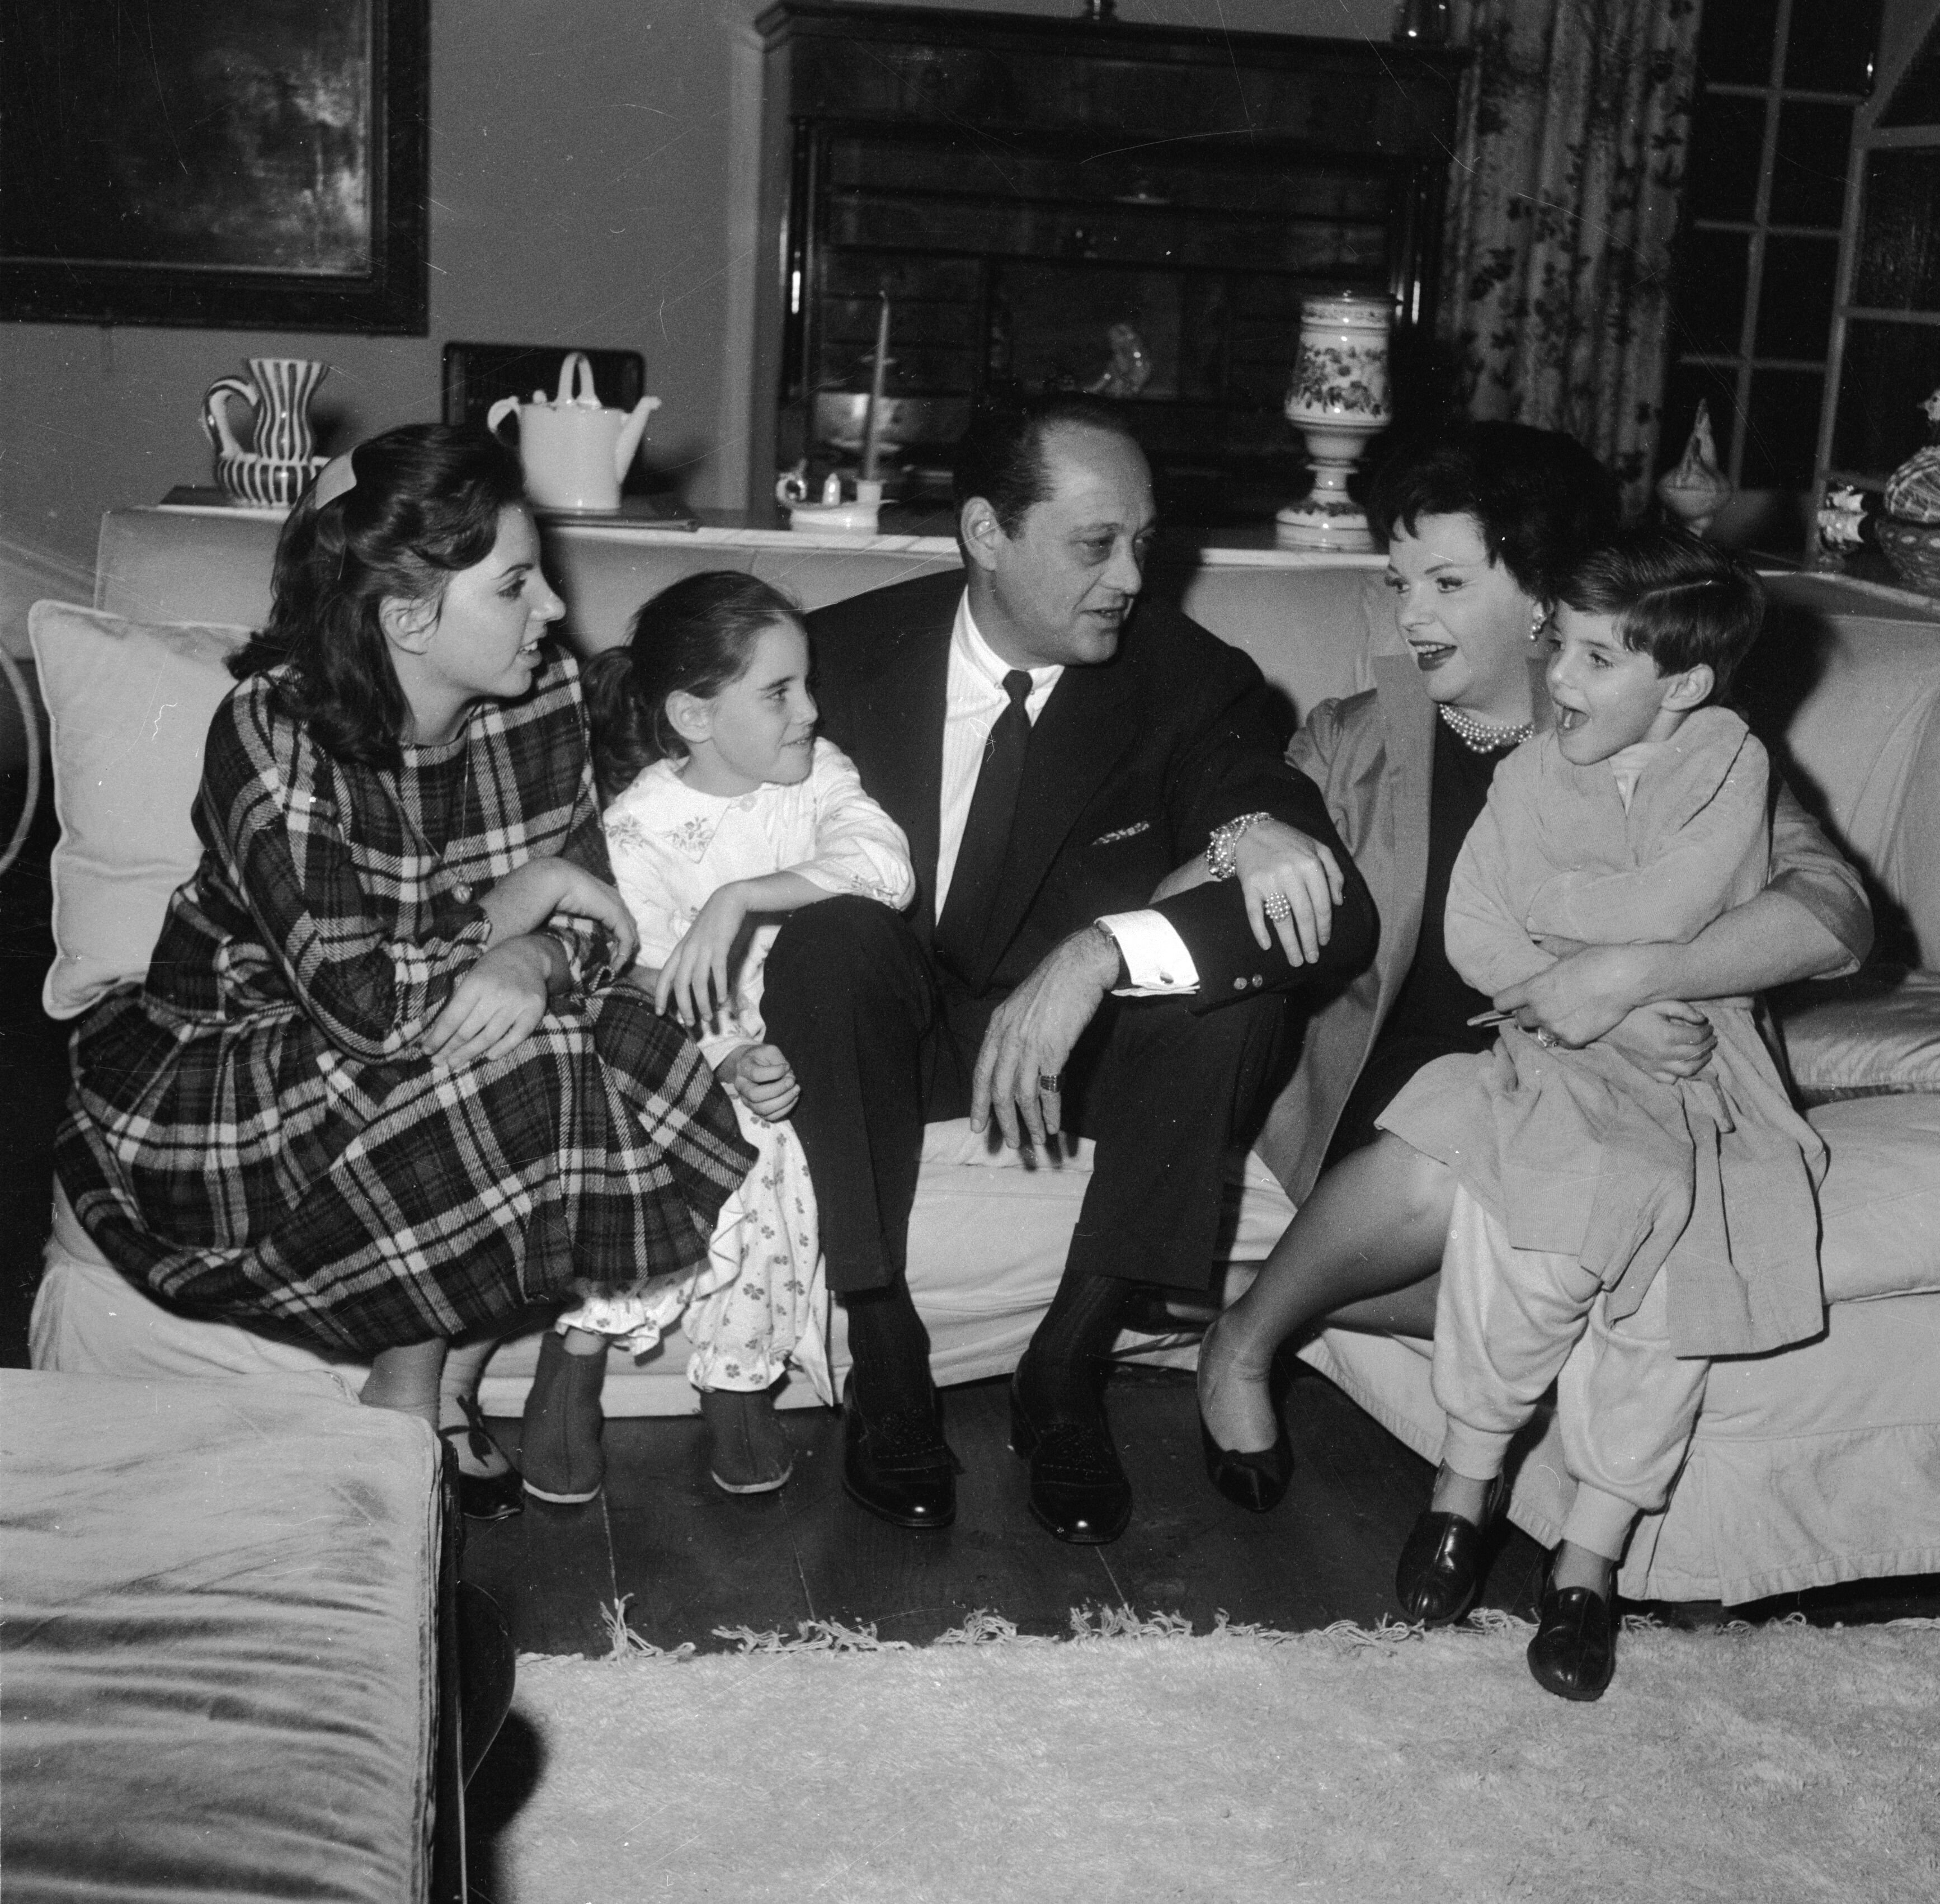 udy Garland her husband, film producer, Sid Luft and their children, Liza, Lorna, and Joe at their home in Chelsea, London. | Source: Getty Images